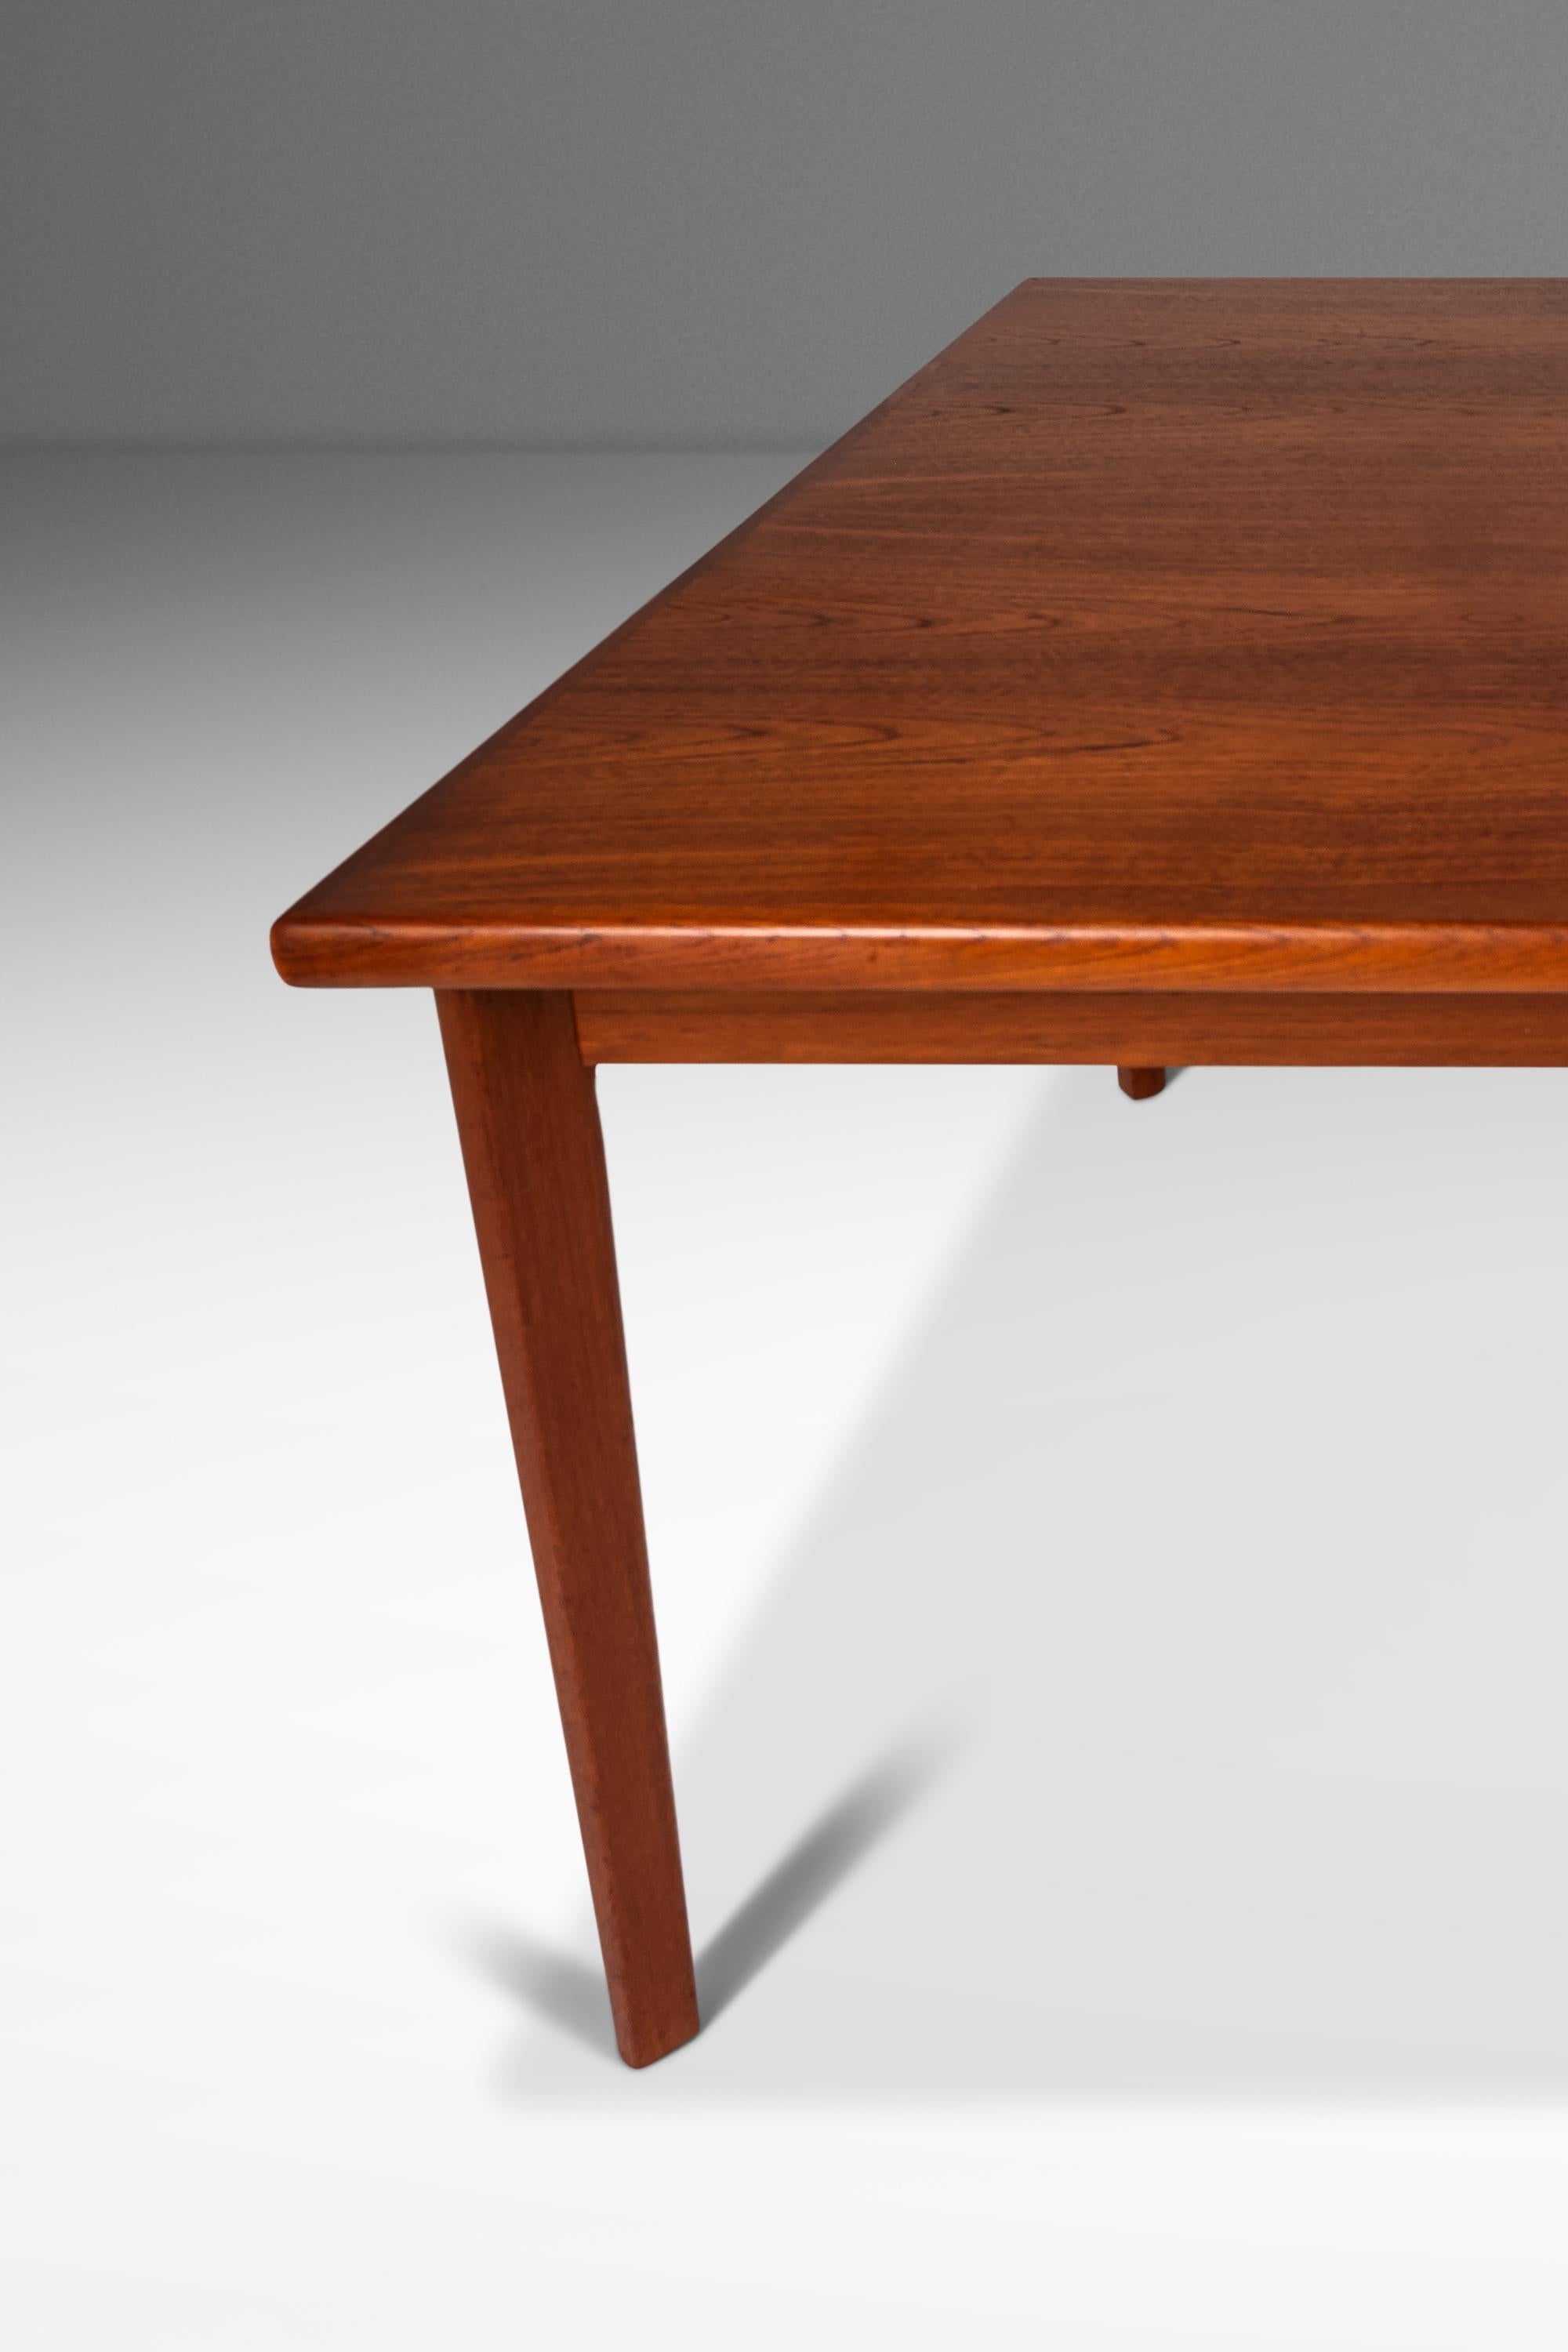 Teak Expansion Dining Table w/ Stow-in Leaves by BRDR Furbo, Denmark, c. 1960s For Sale 2